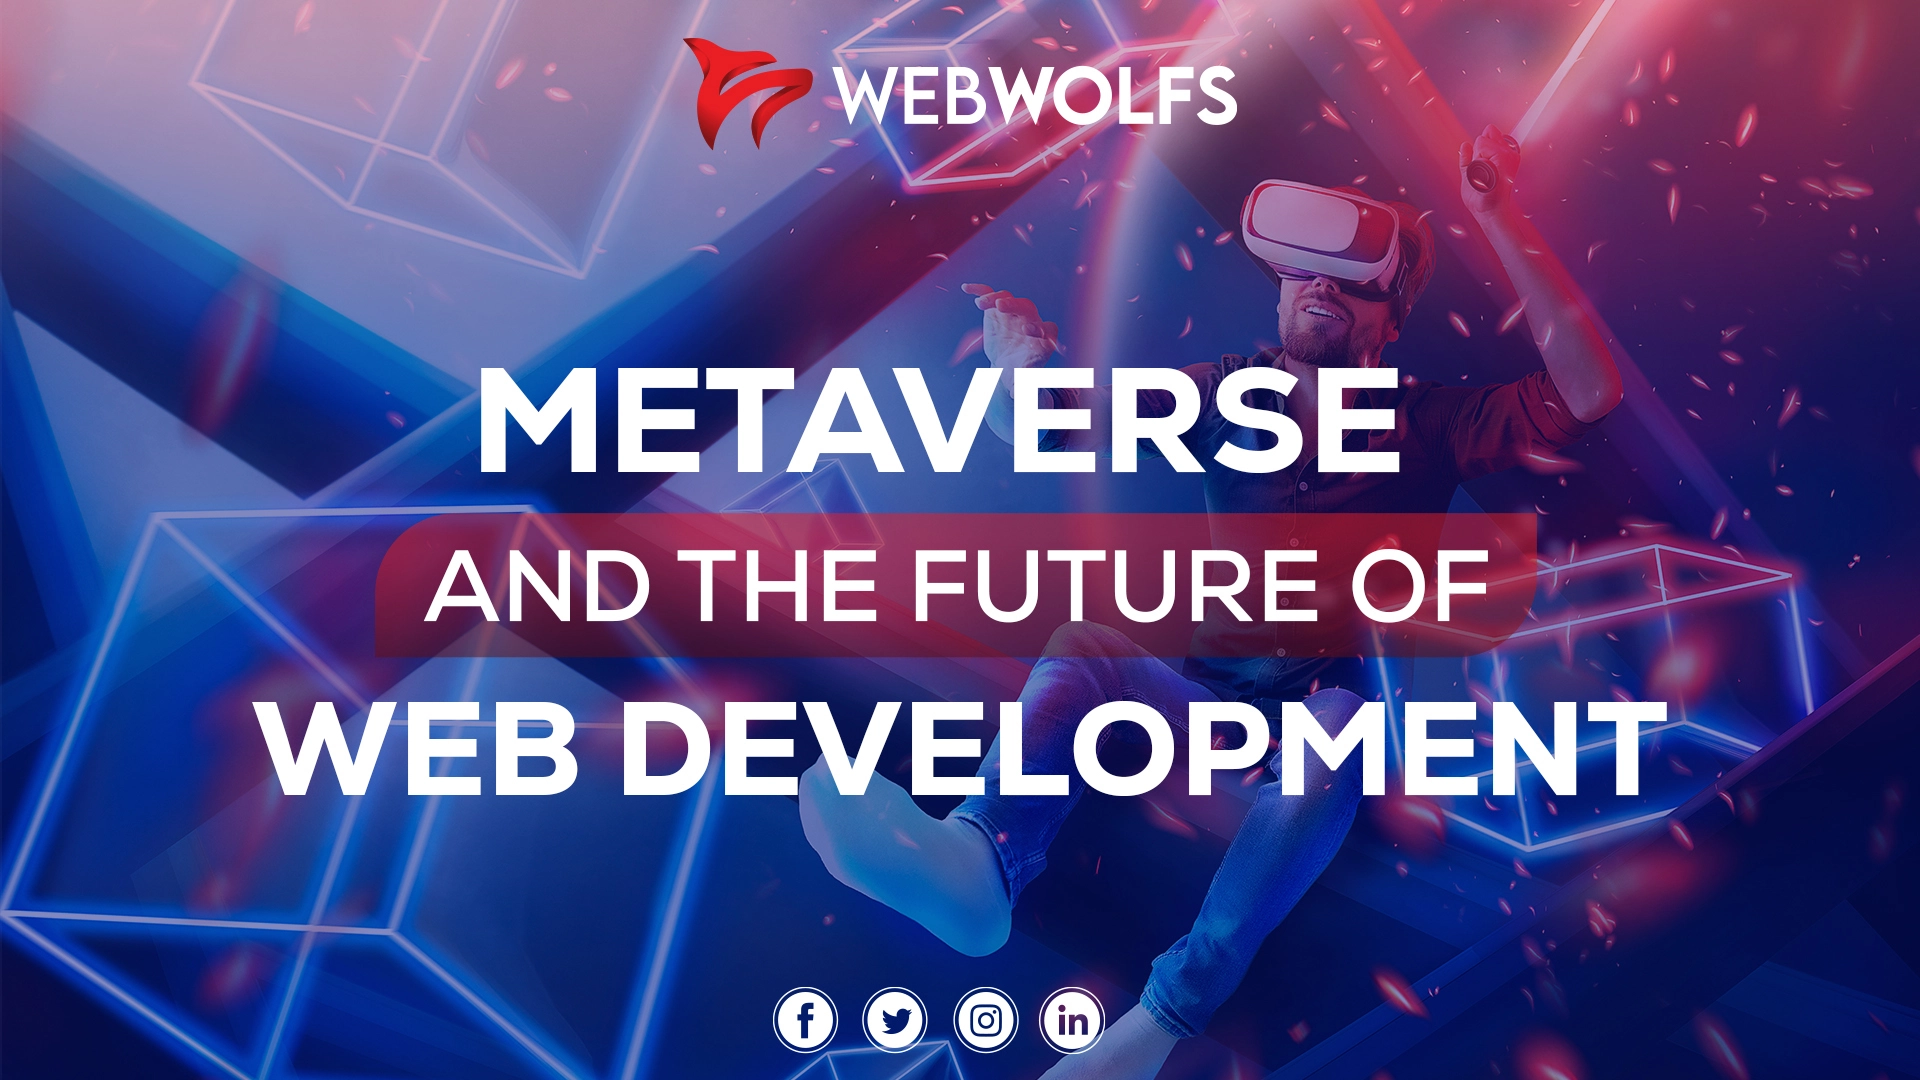 Metaverse and the Future of Web Development